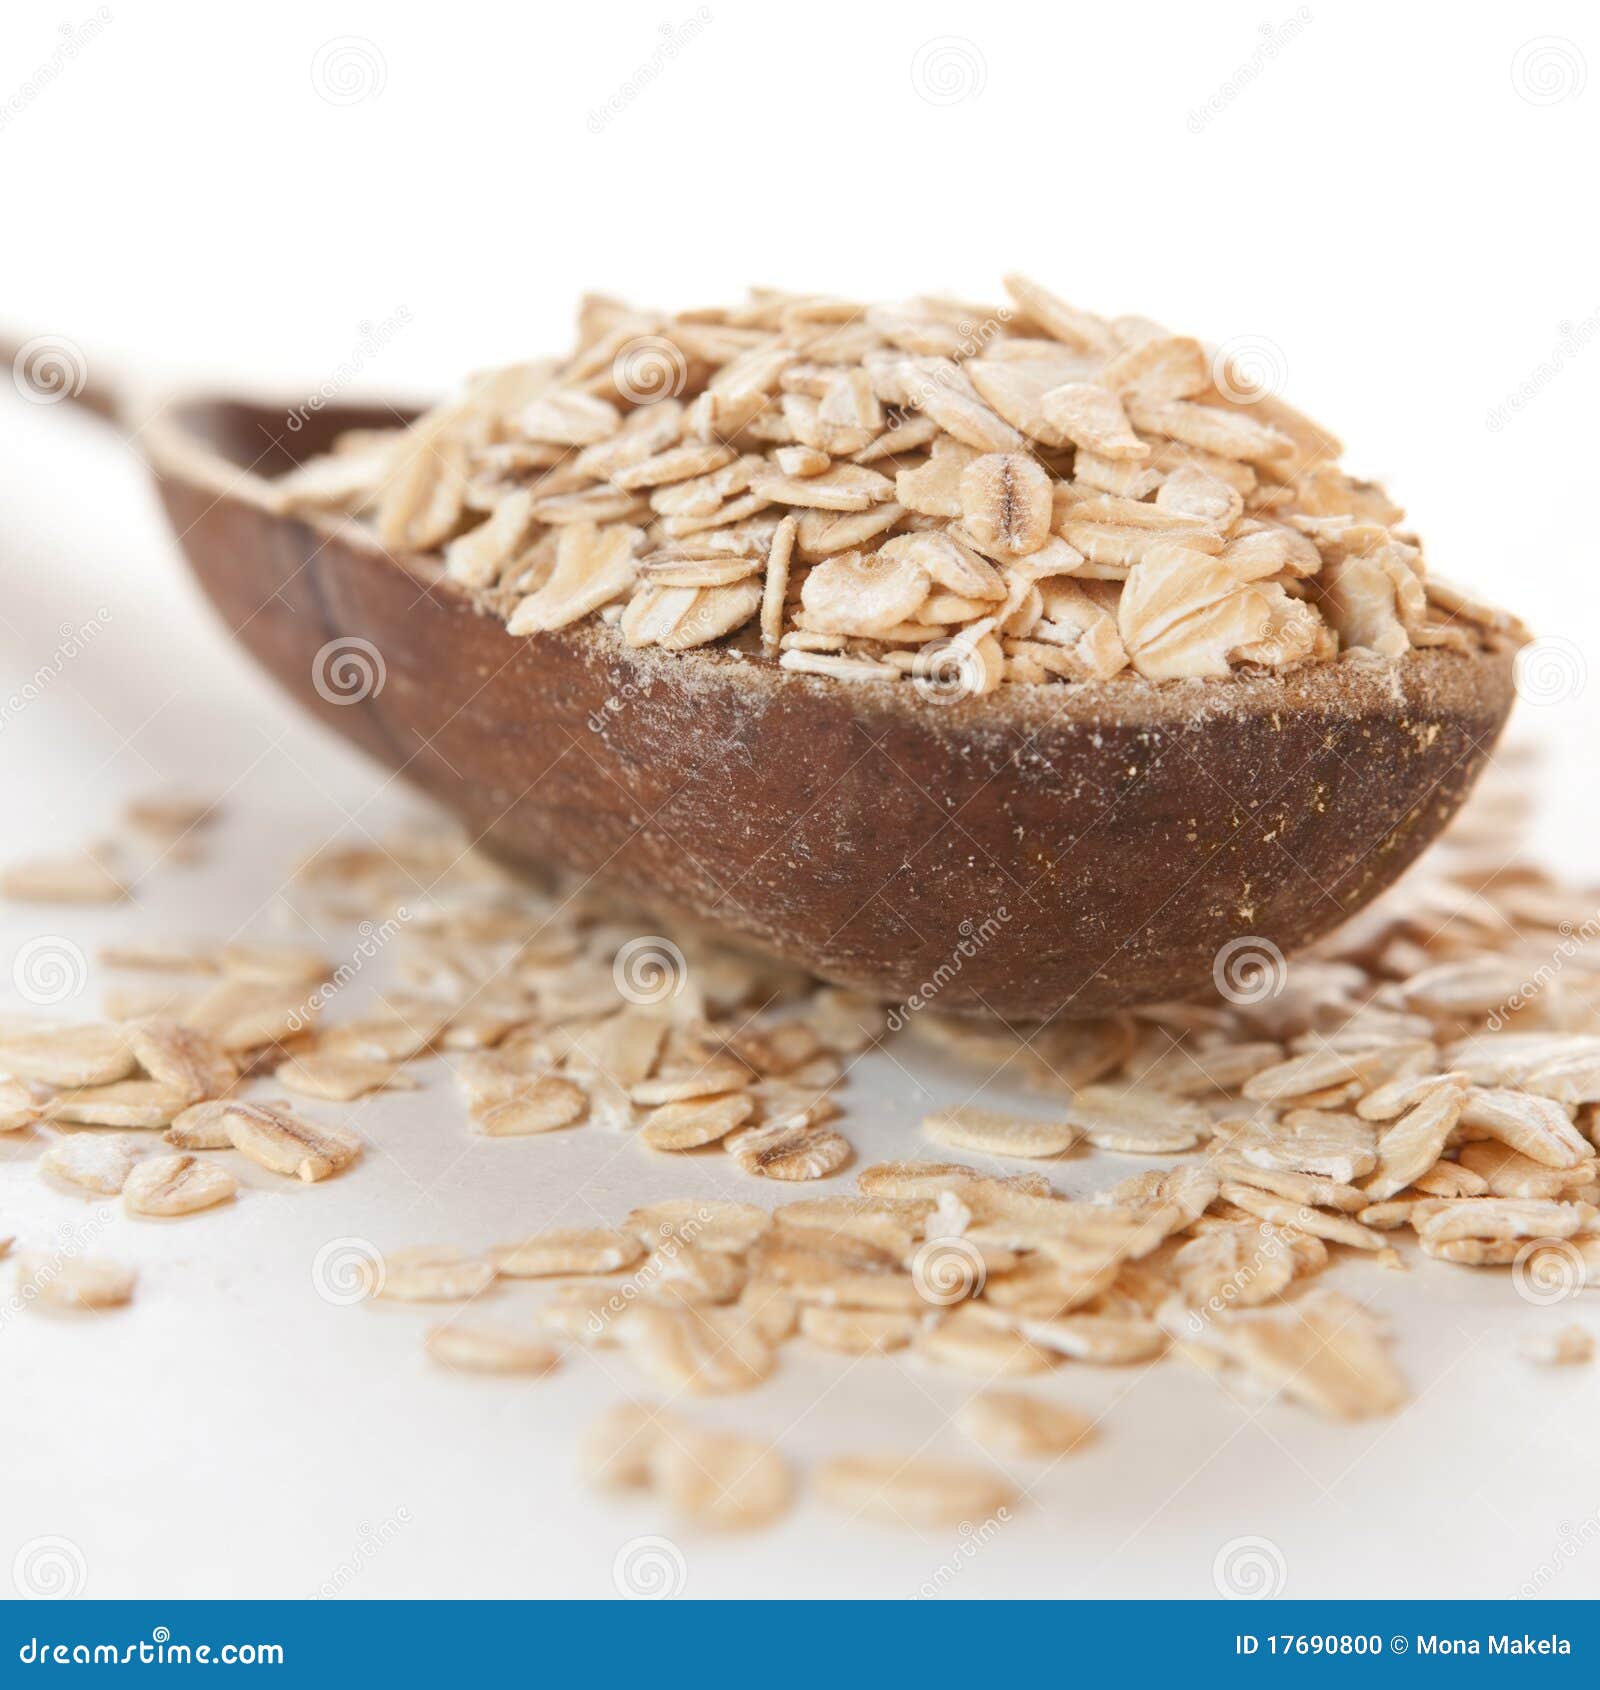 raw thick rolled oats